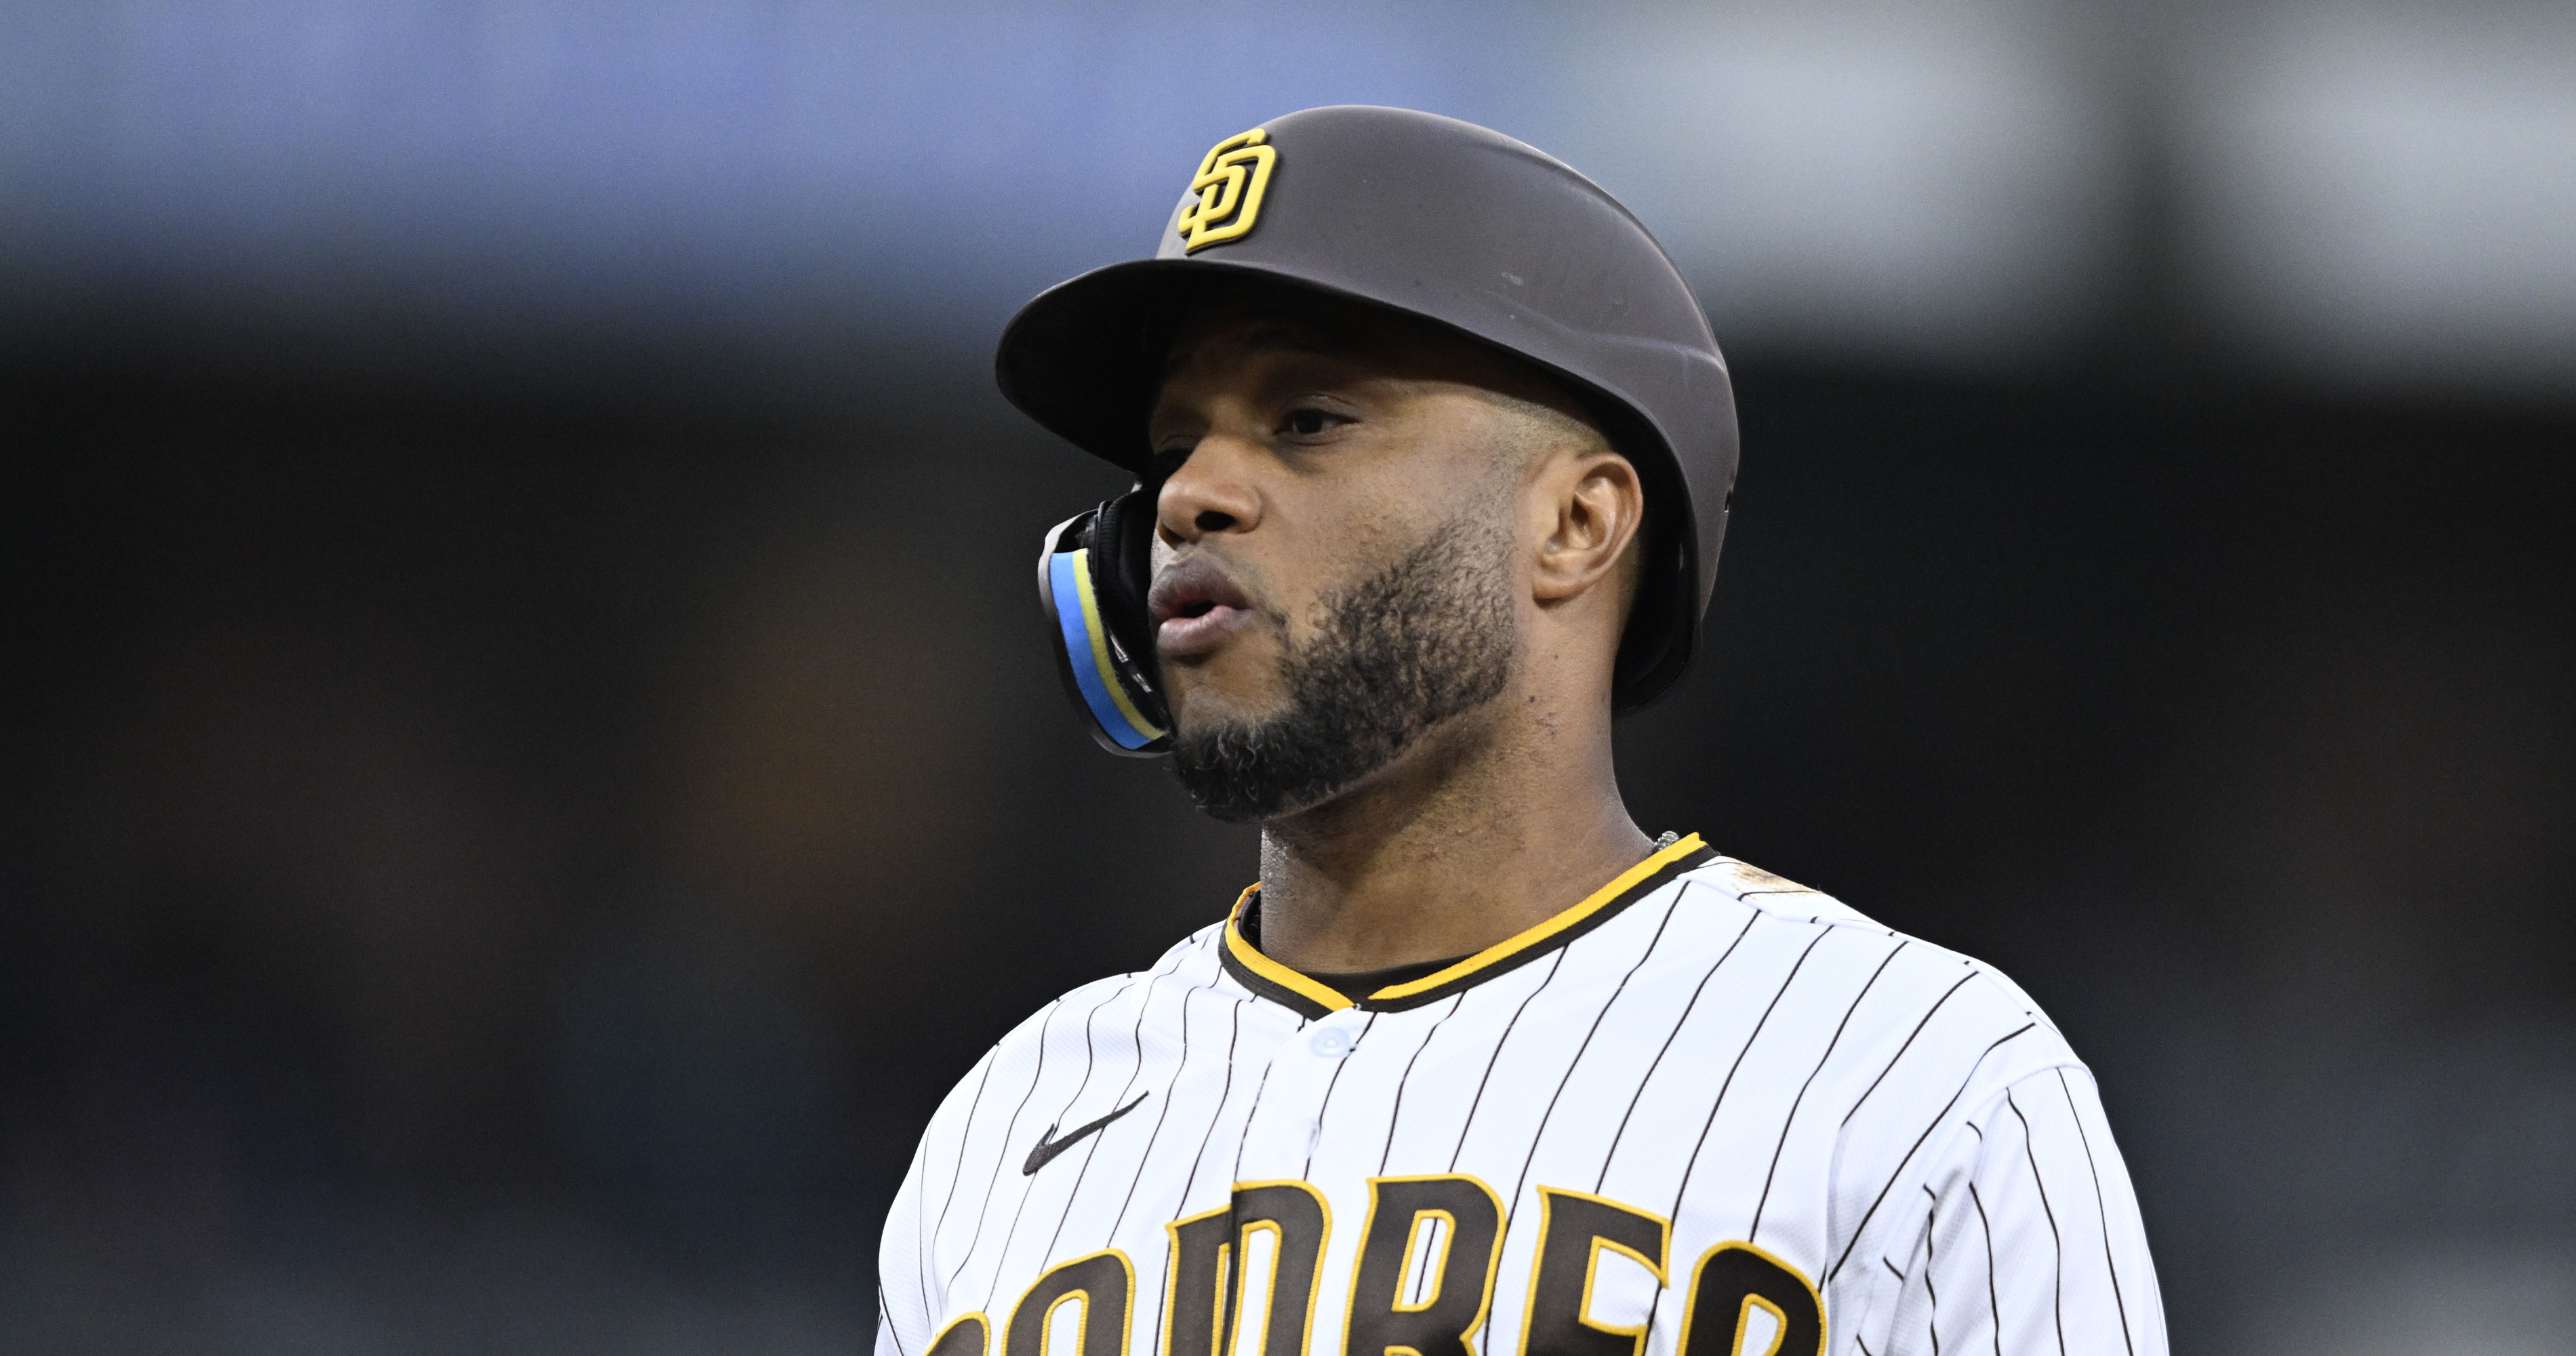 Fantasy Baseball: Robinson Cano and the Top Players for Each AL